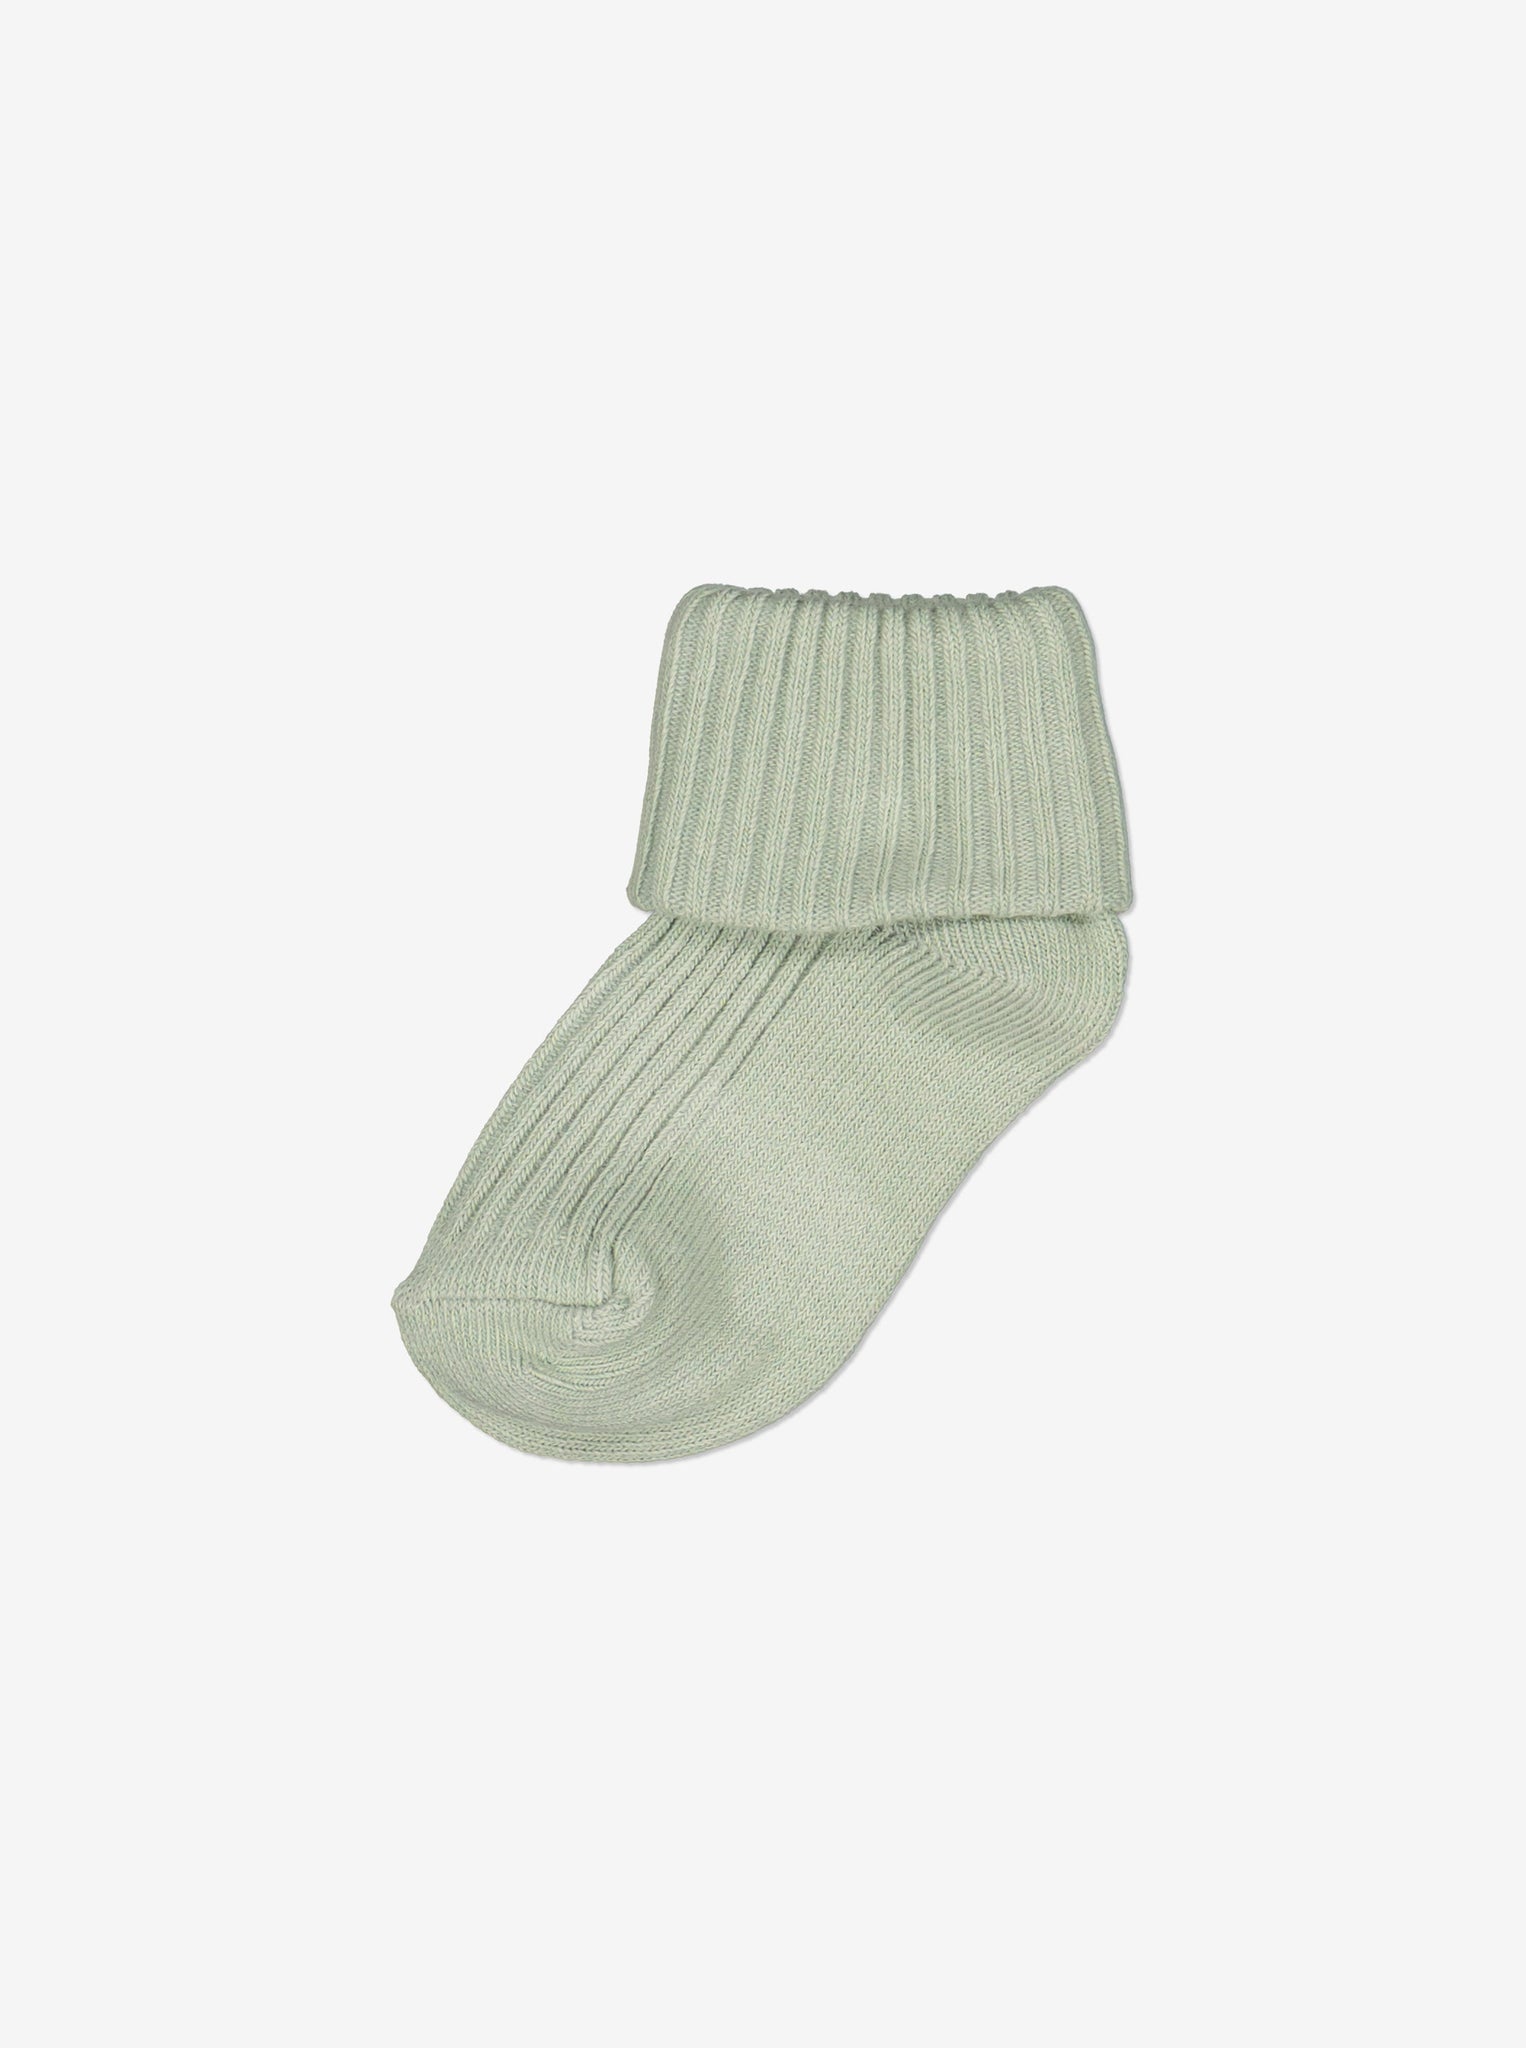  Green Soft Baby Socks from Polarn O. Pyret Kidswear. Made using eco-friendly materials.